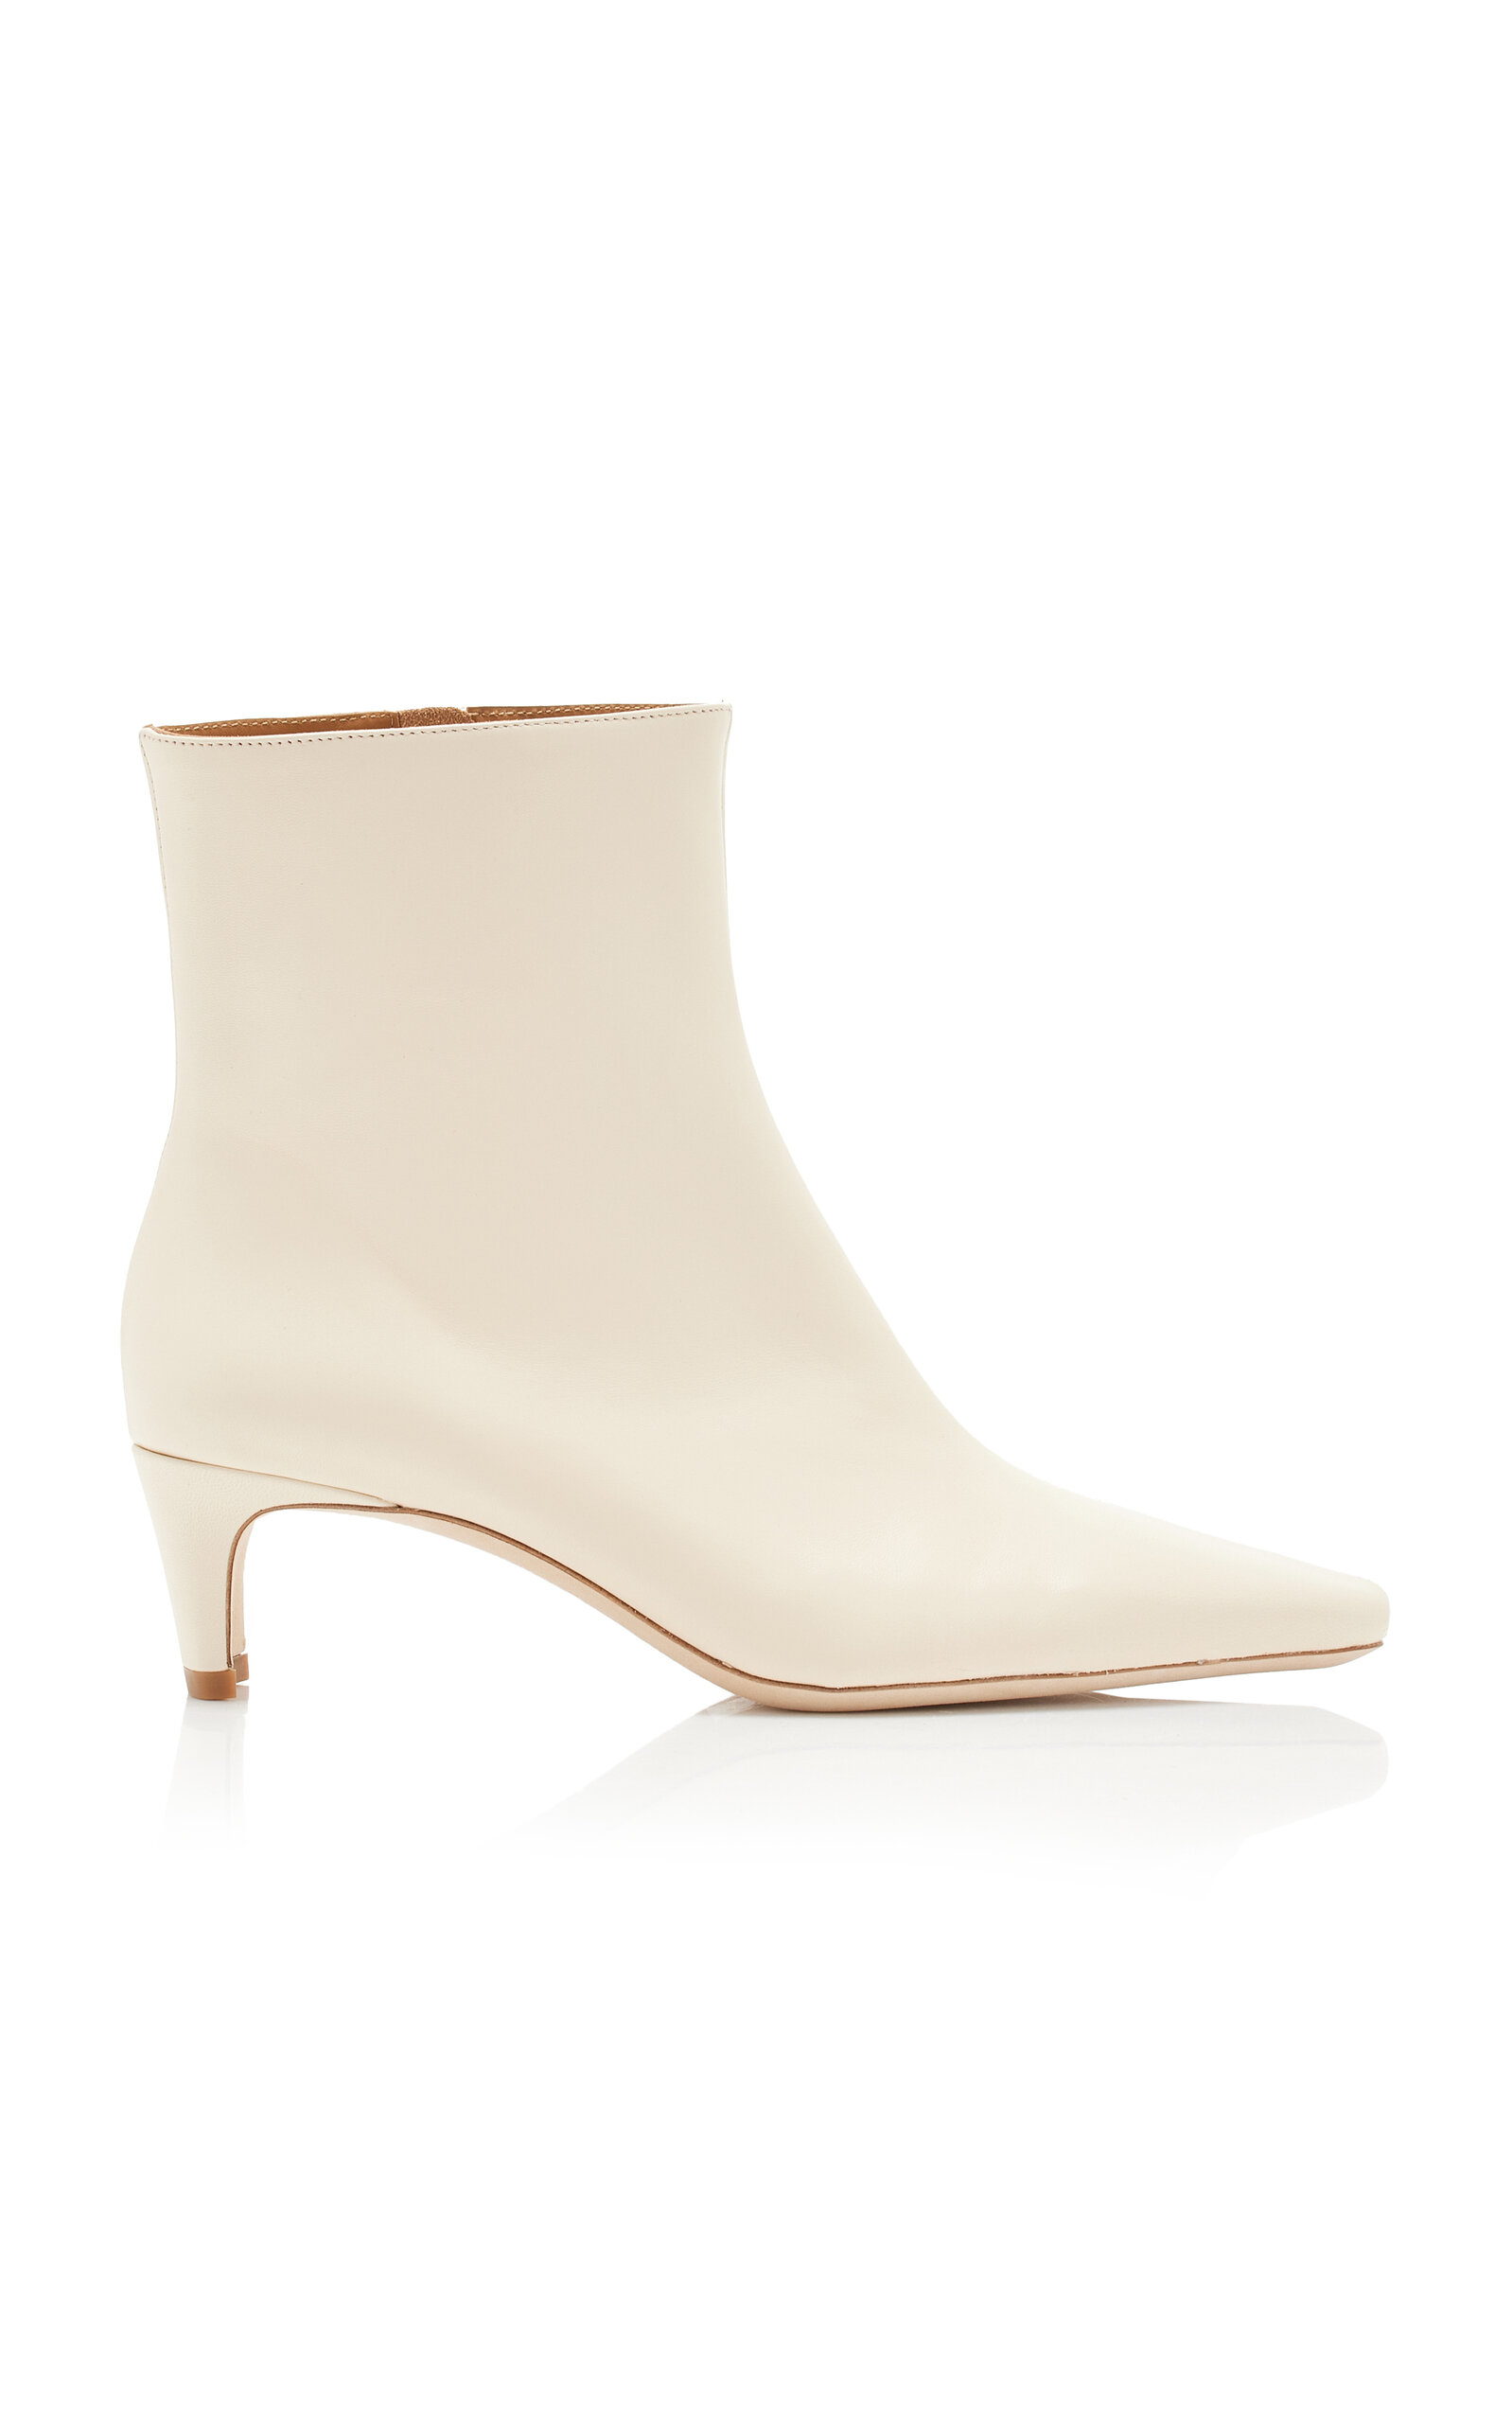 Wally Leather Ankle Boots